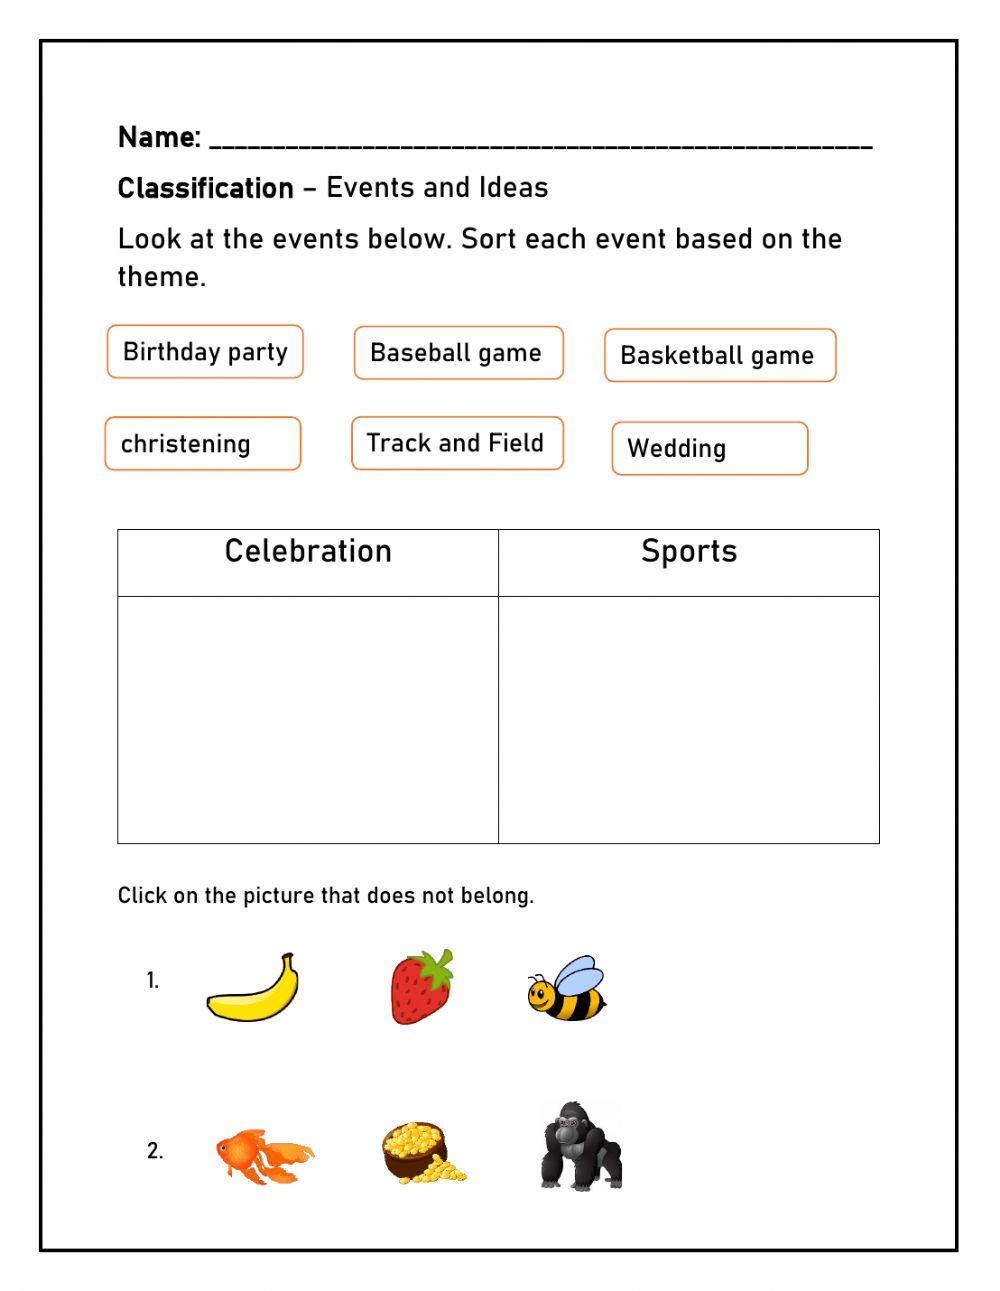 Classification - Events and Idea